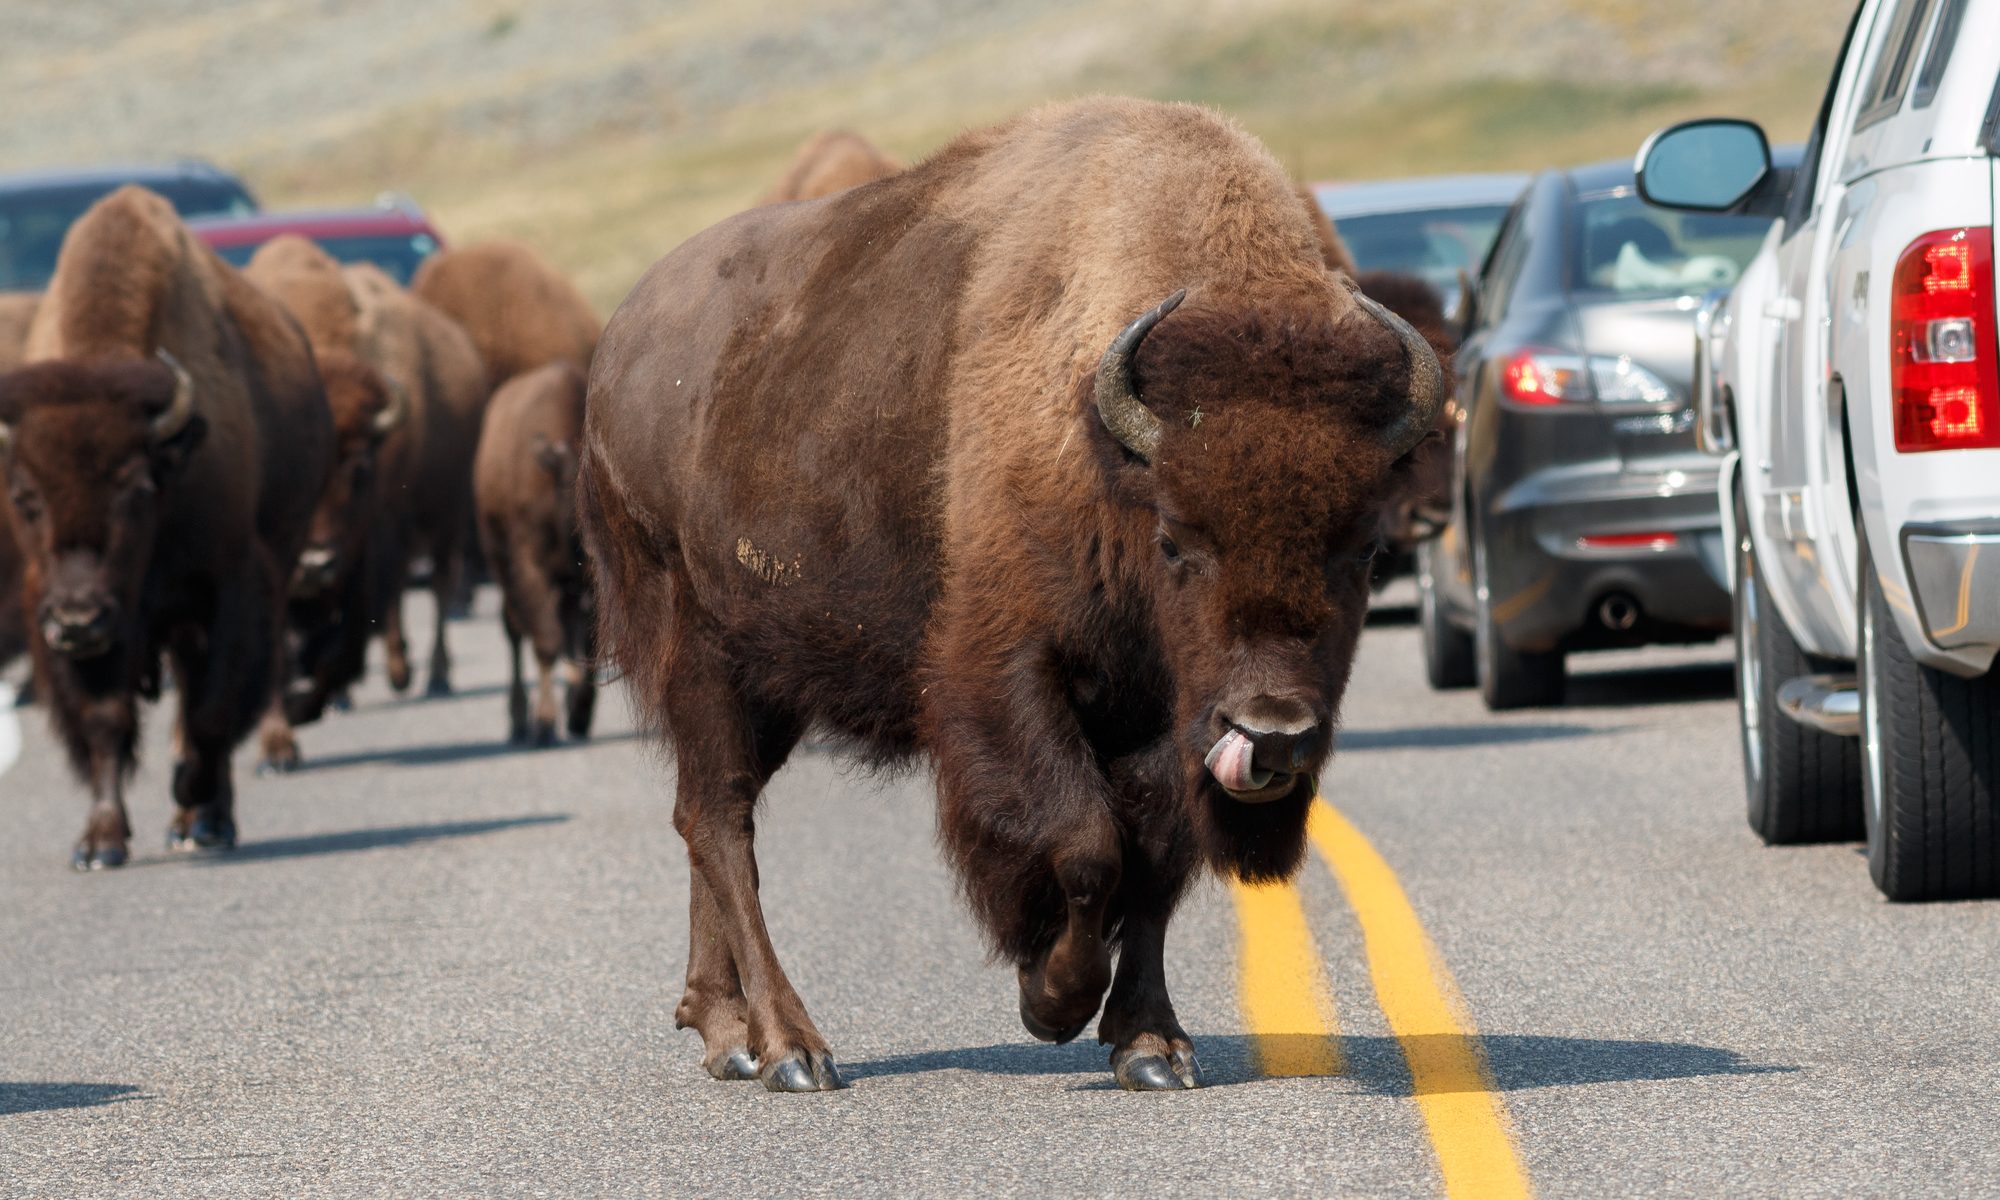 photograph of bison on the road in Yellowstone National Park